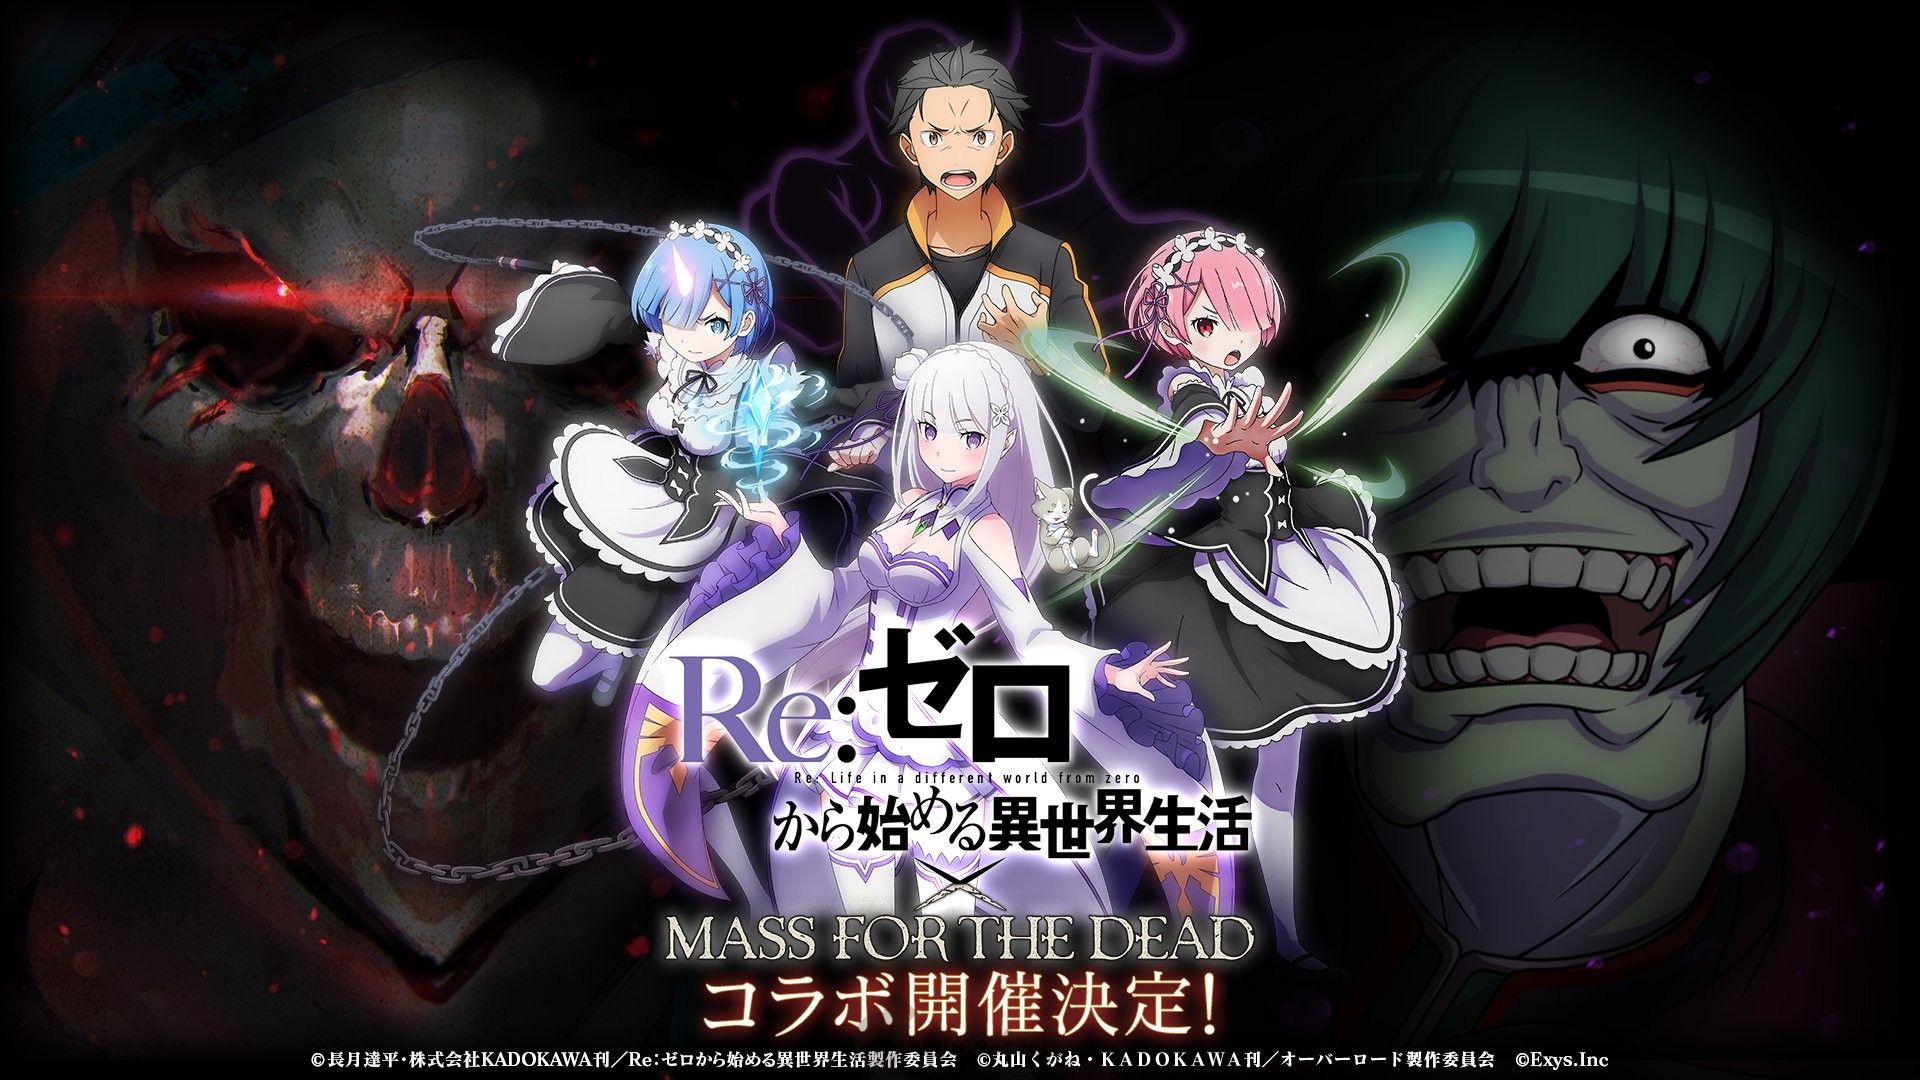 Qoo News] MASS FOR THE DEAD x Re:Zero Collaboration Confirmed